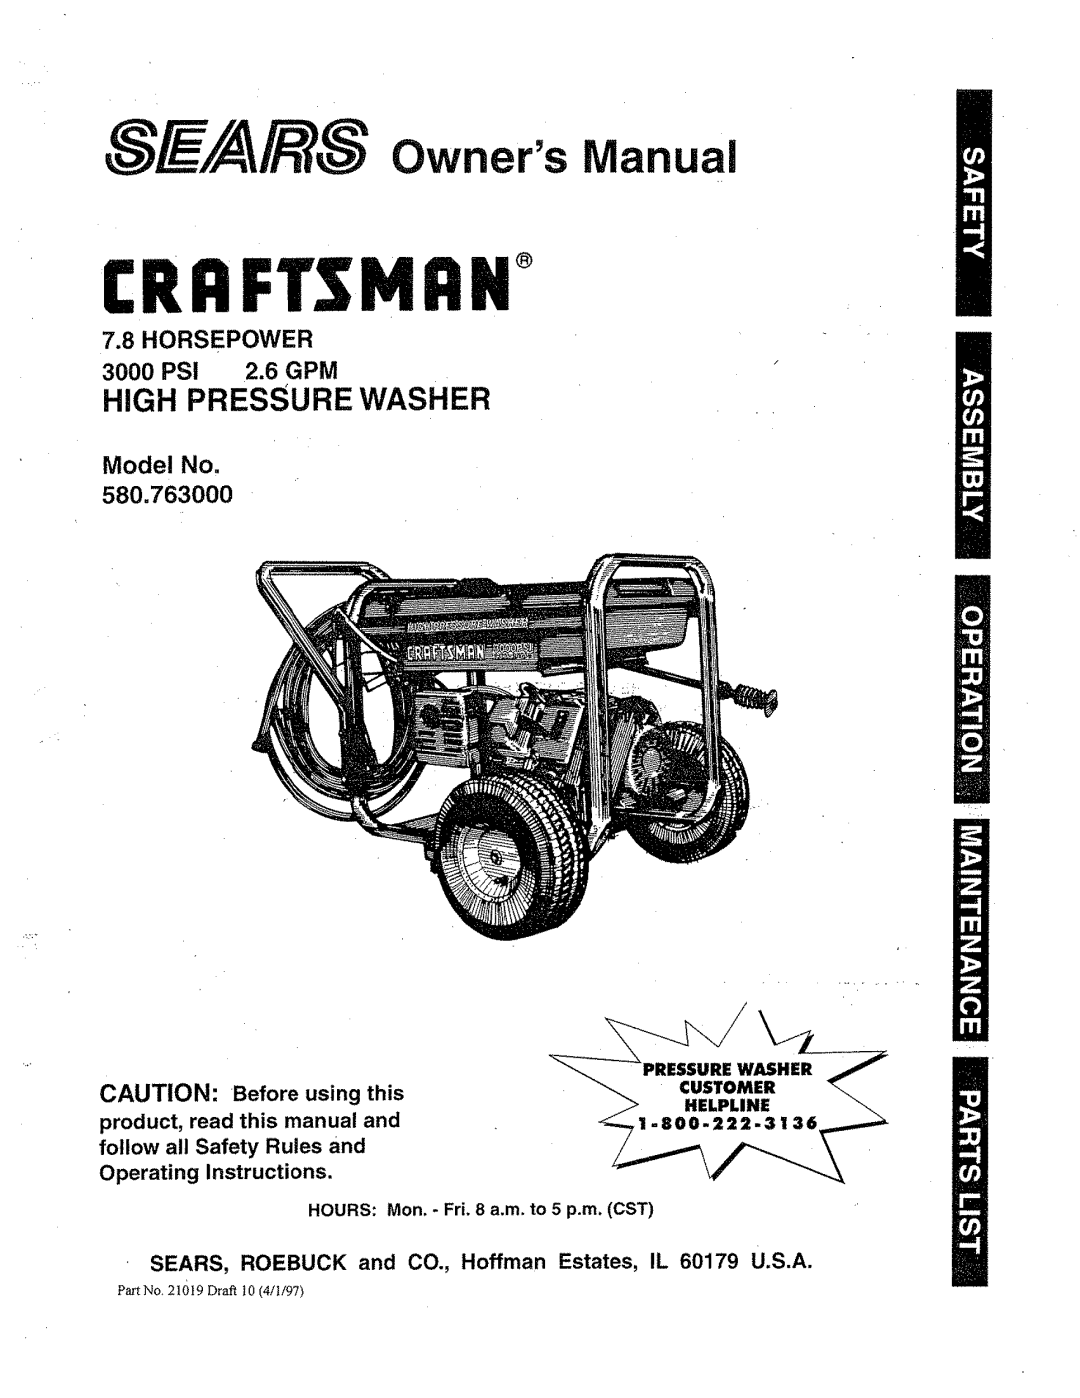 Craftsman 580.763 owner manual CRRF¥$MnN, High Pressure Washer, CAUTION Before using this, Operating Instructions 